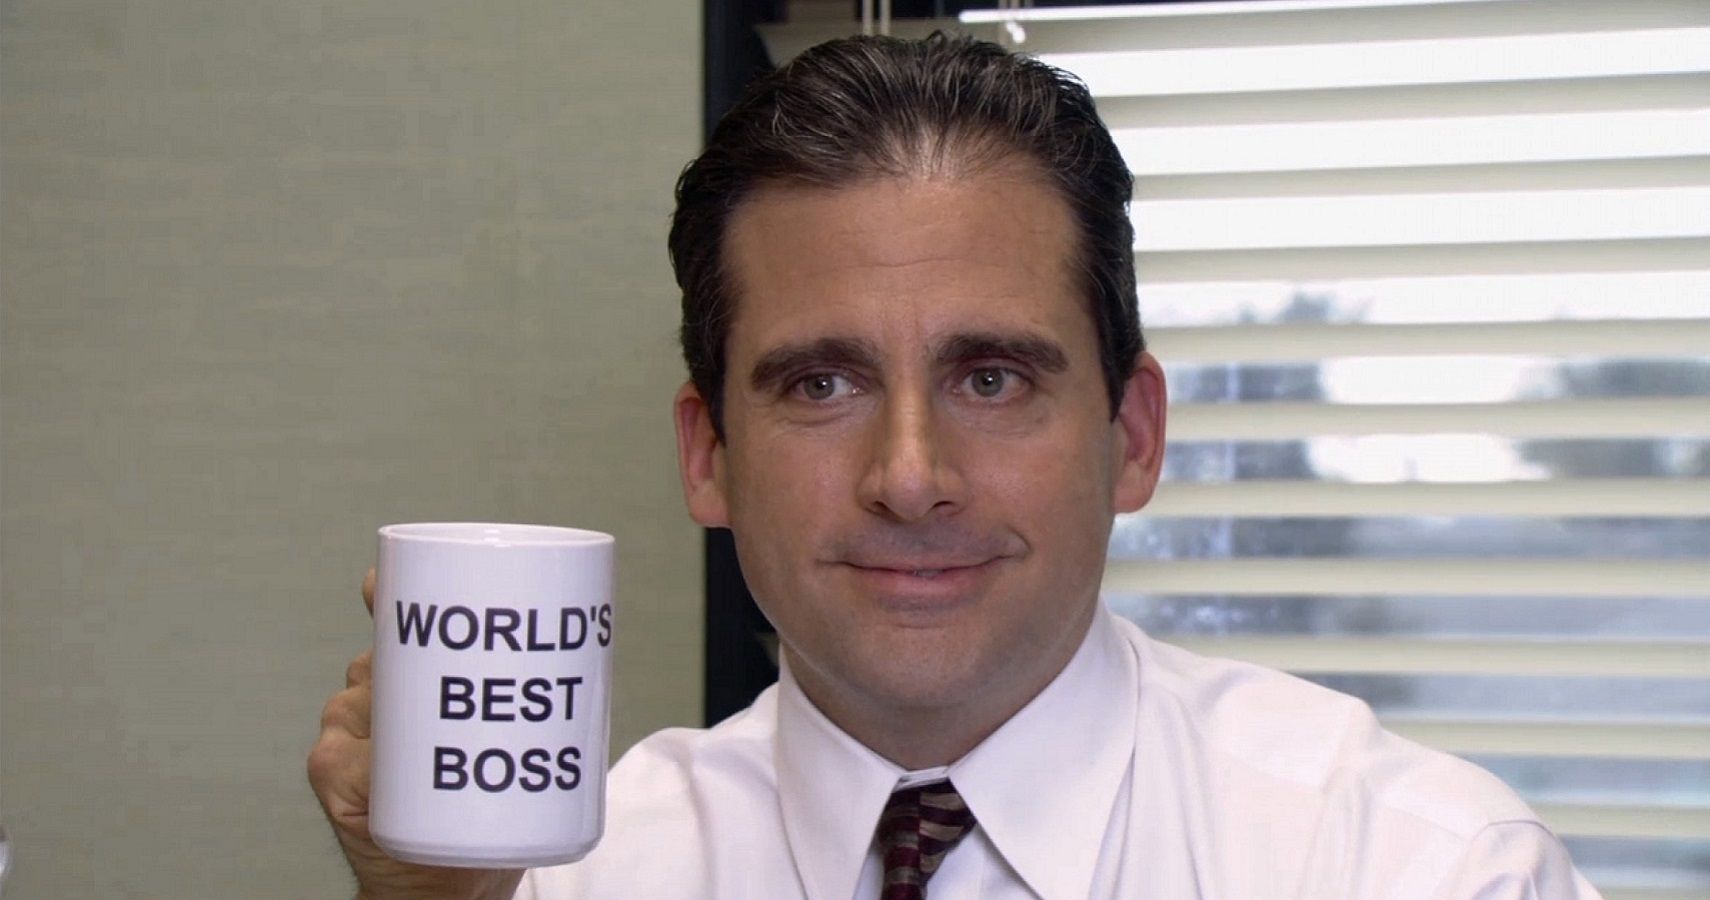 The Office: The 10 Most Annoying Things Michel Scott Ever Did